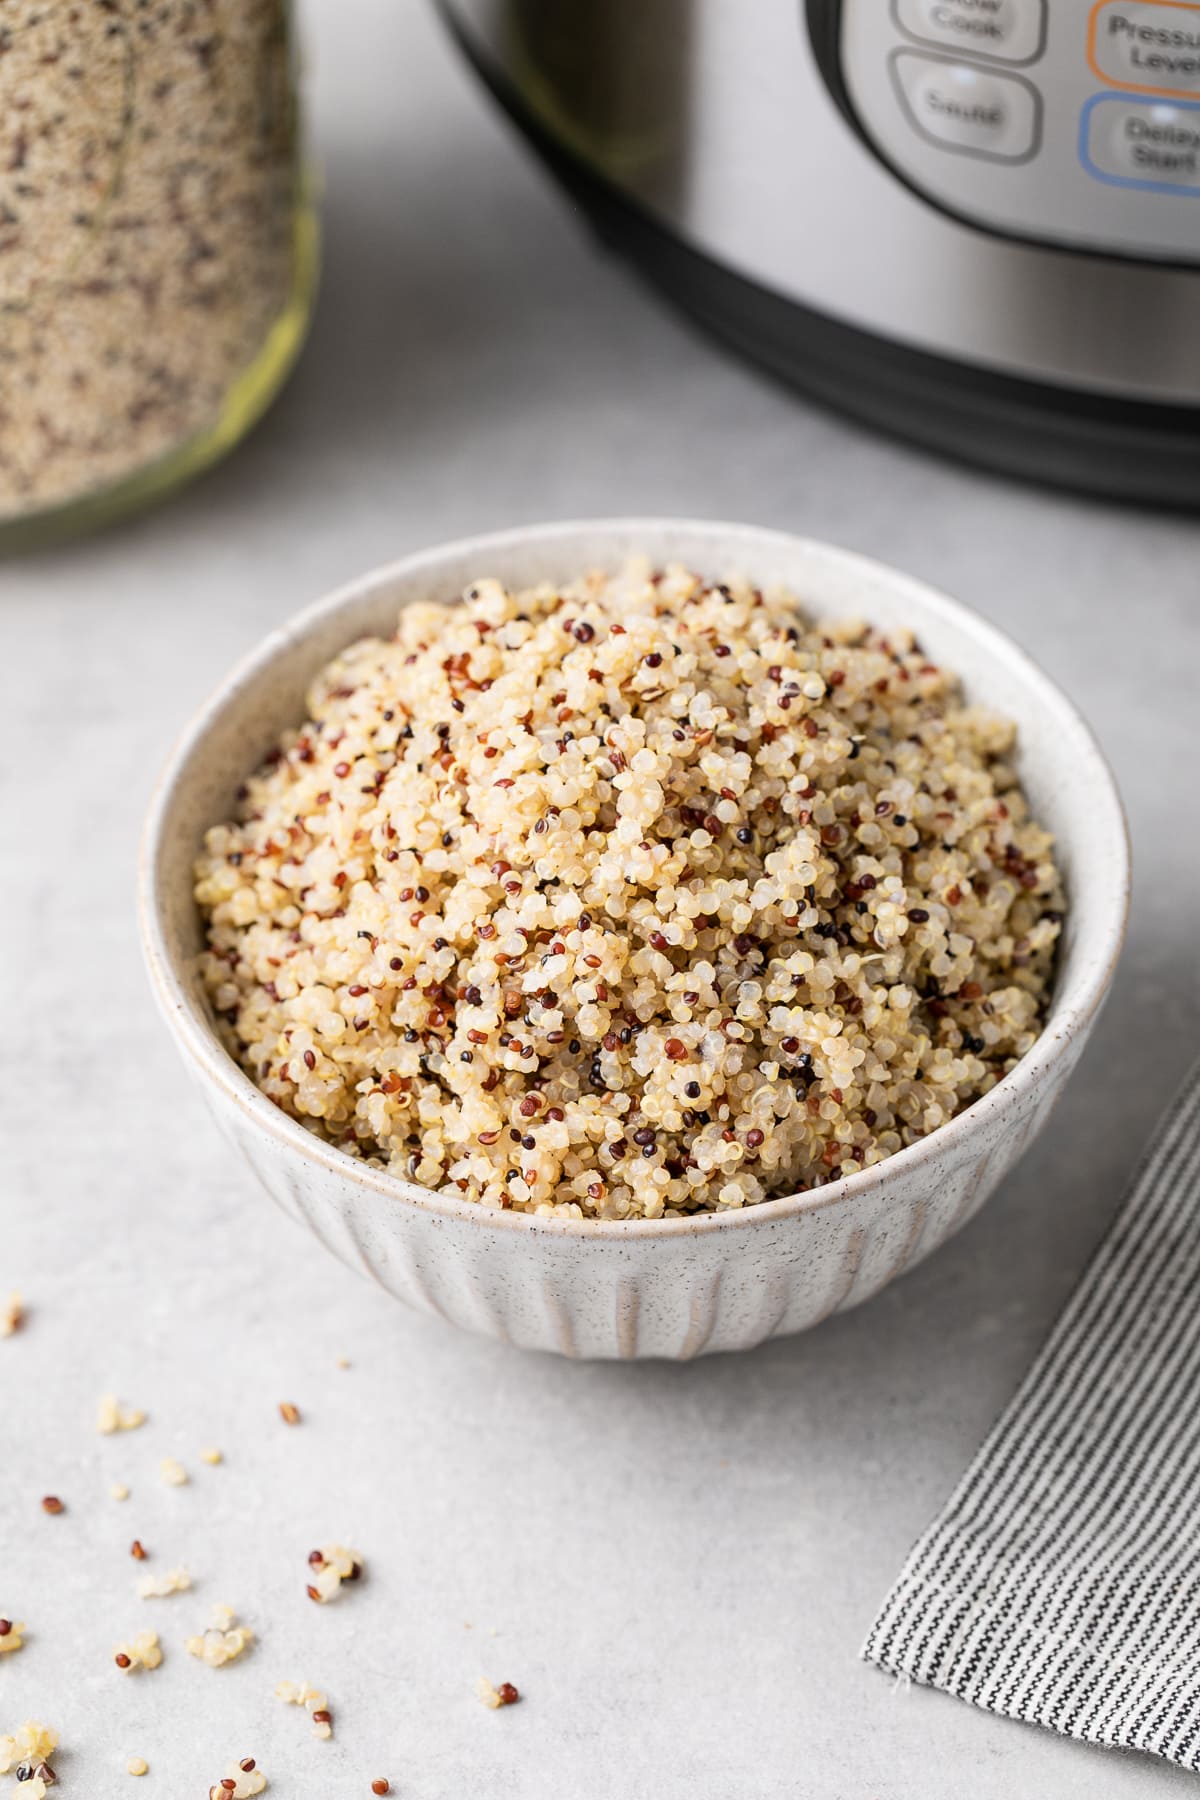 Side view of a bowl filled with quinoa made in a pot with surrounding items.